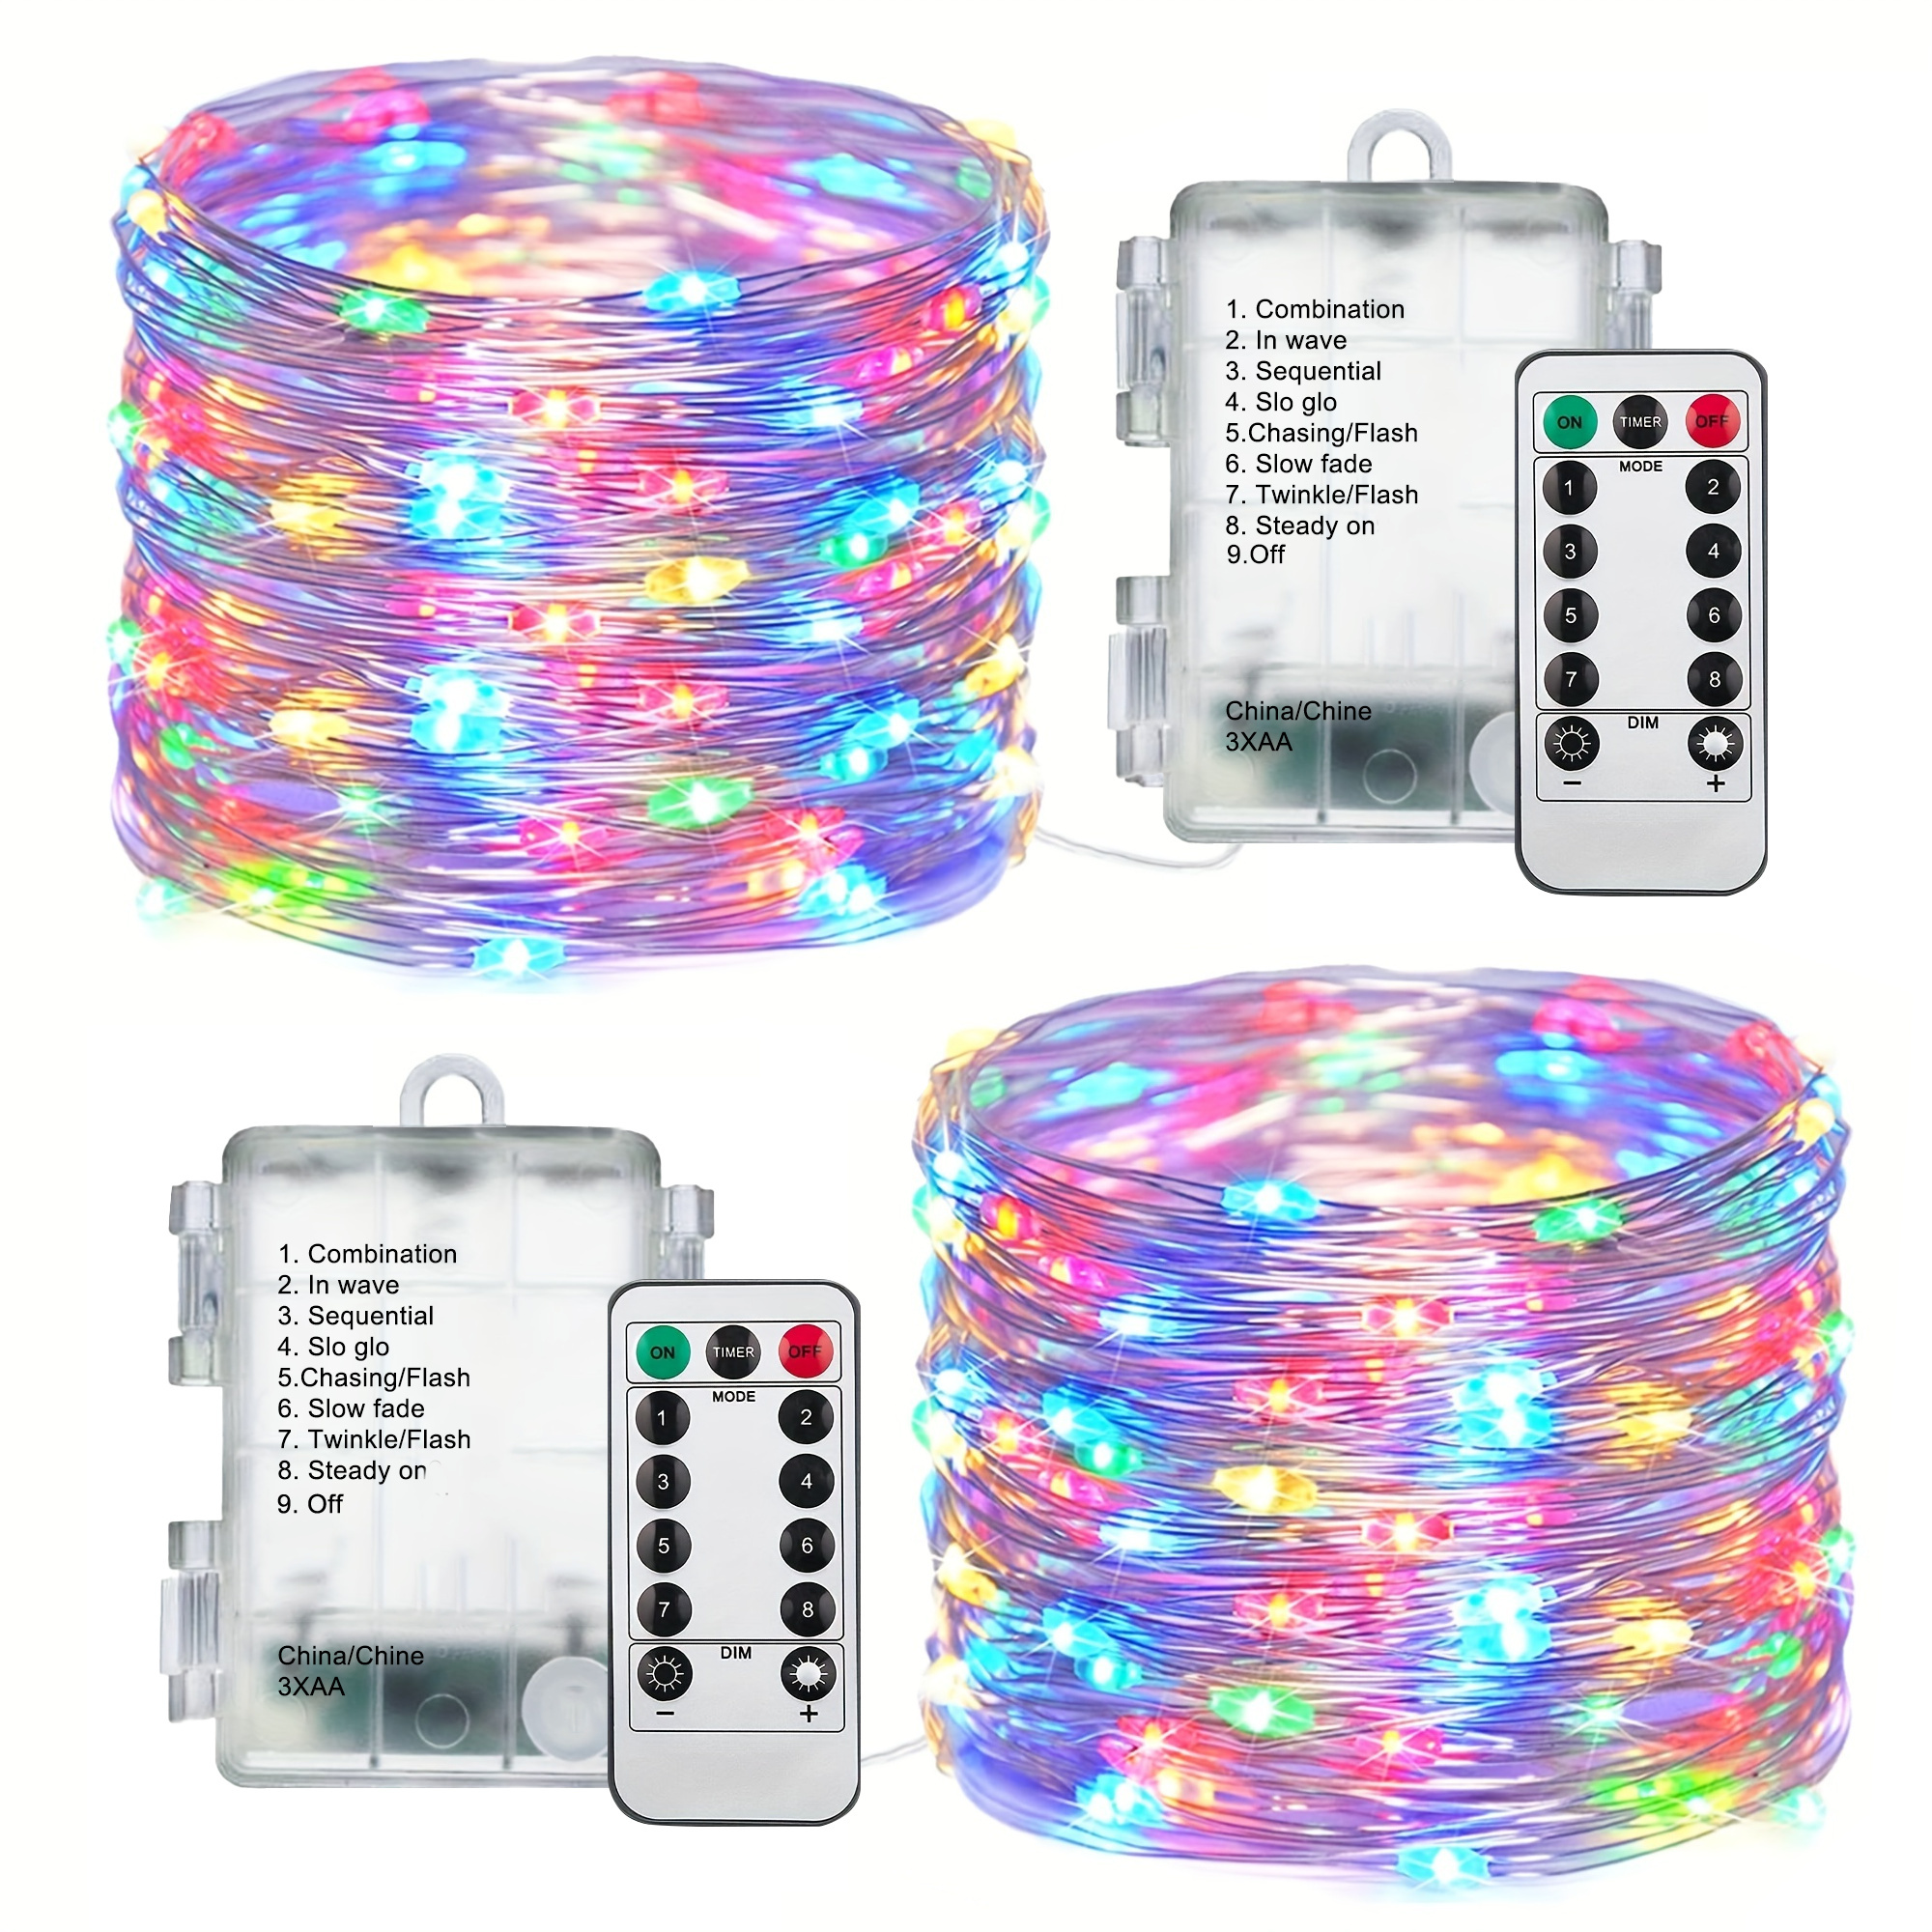 2 pack 32 8ft 100led fairy lights battery operated with remote control timer 8 modes waterproof copper wire twinkle string lights christmas lights for bedroom party indoor warm white multicolor cool white details 3